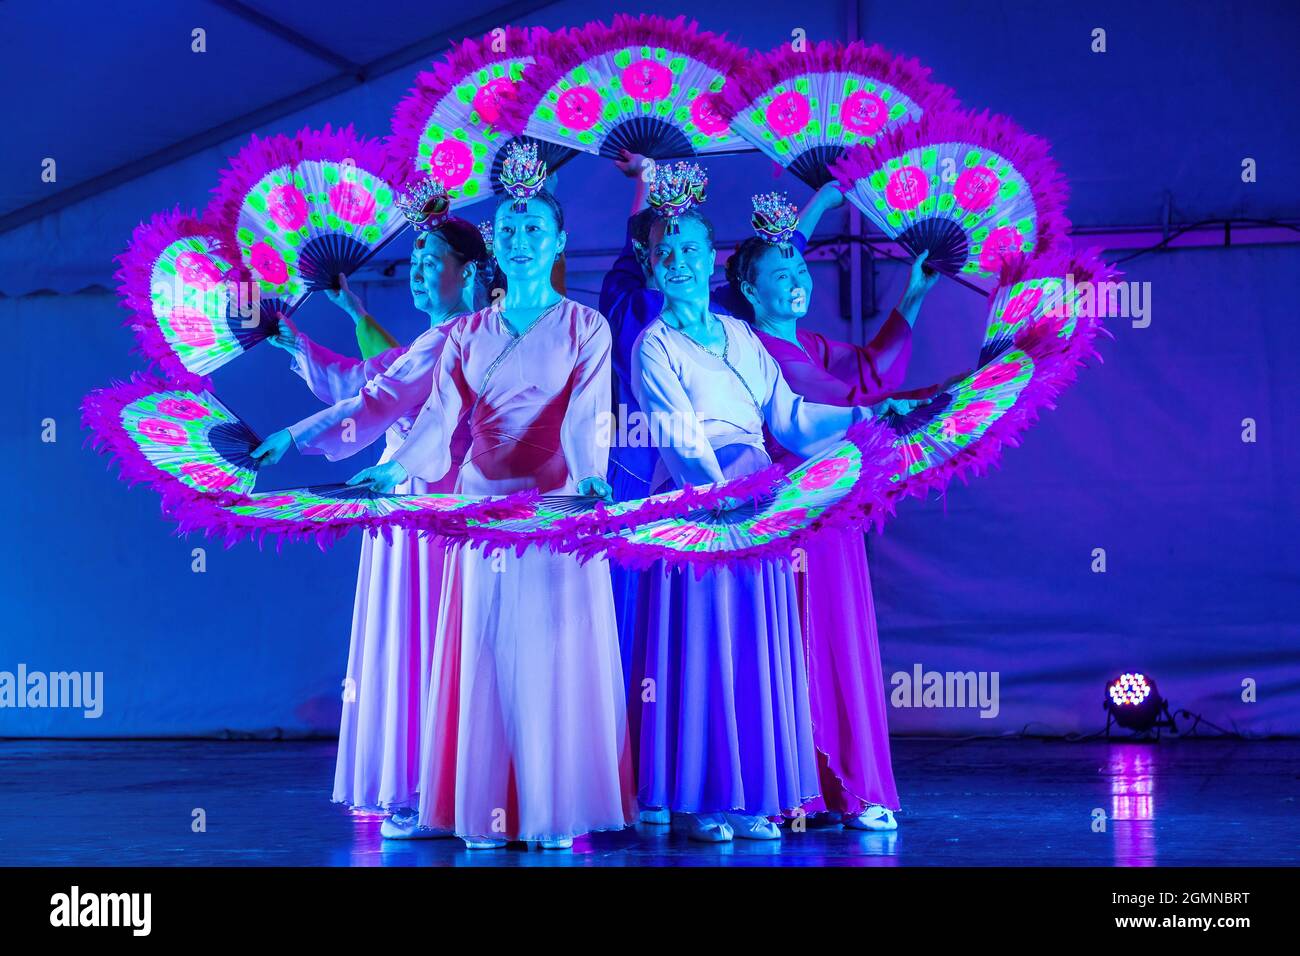 Korean women performing a buchaechum, or traditional fan dance, on stage under artificial lighting. They are wearing hanbok dresses Stock Photo